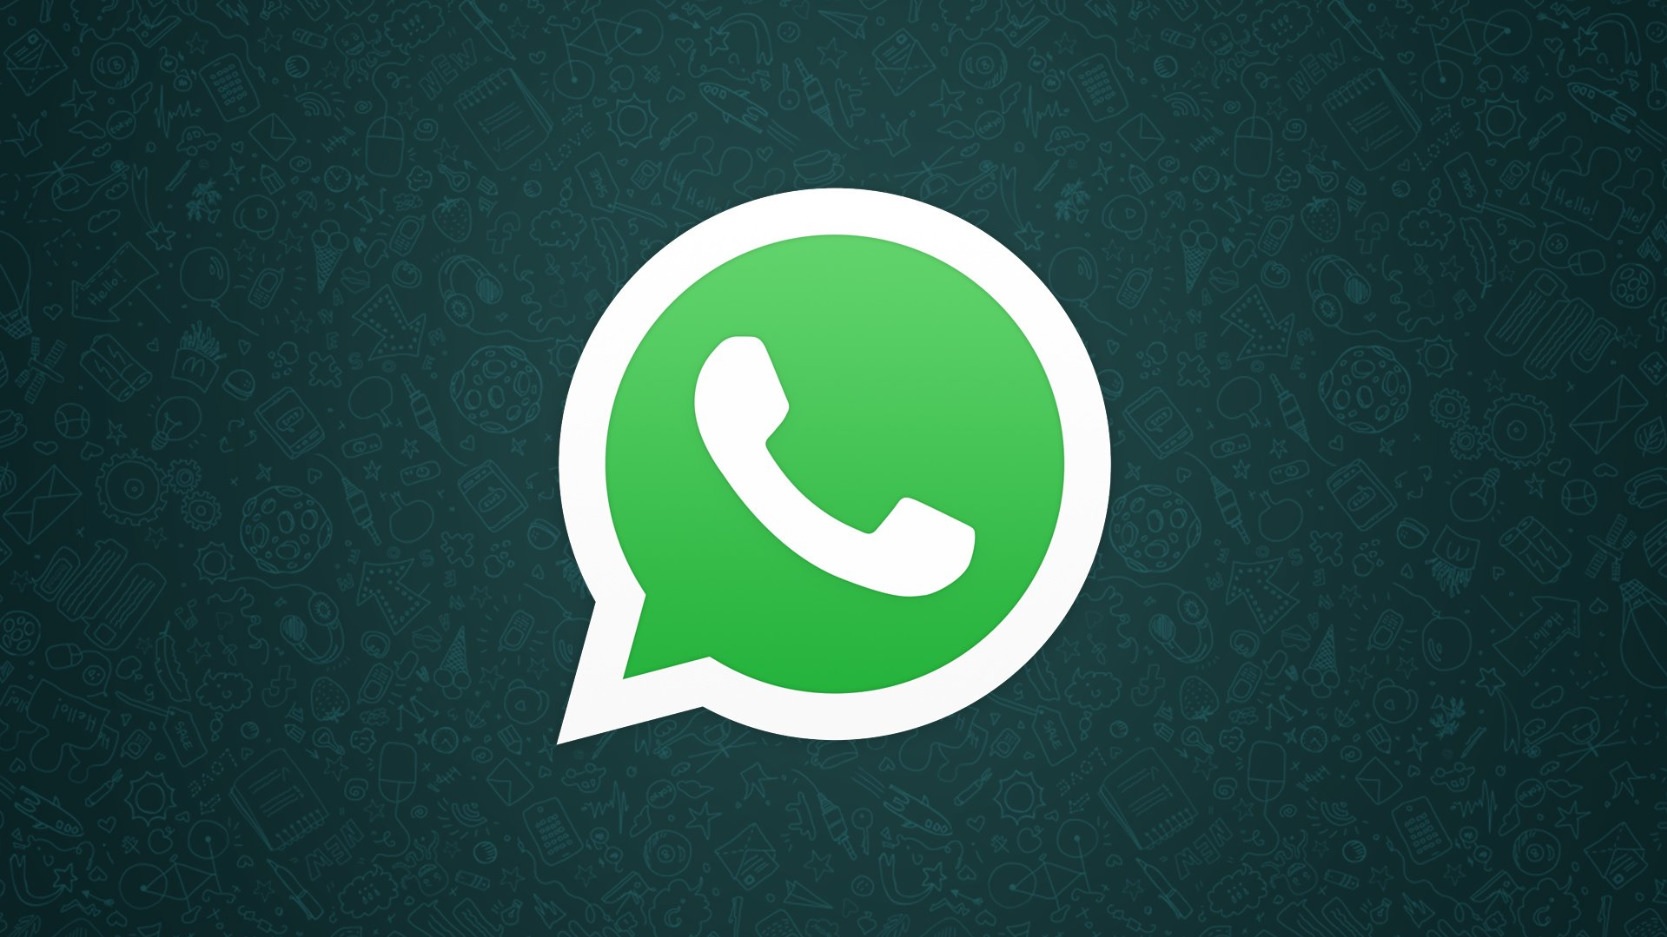 Download the latest WhatsApp APK [2.20.195.17 and 2.20.197.9 beta]